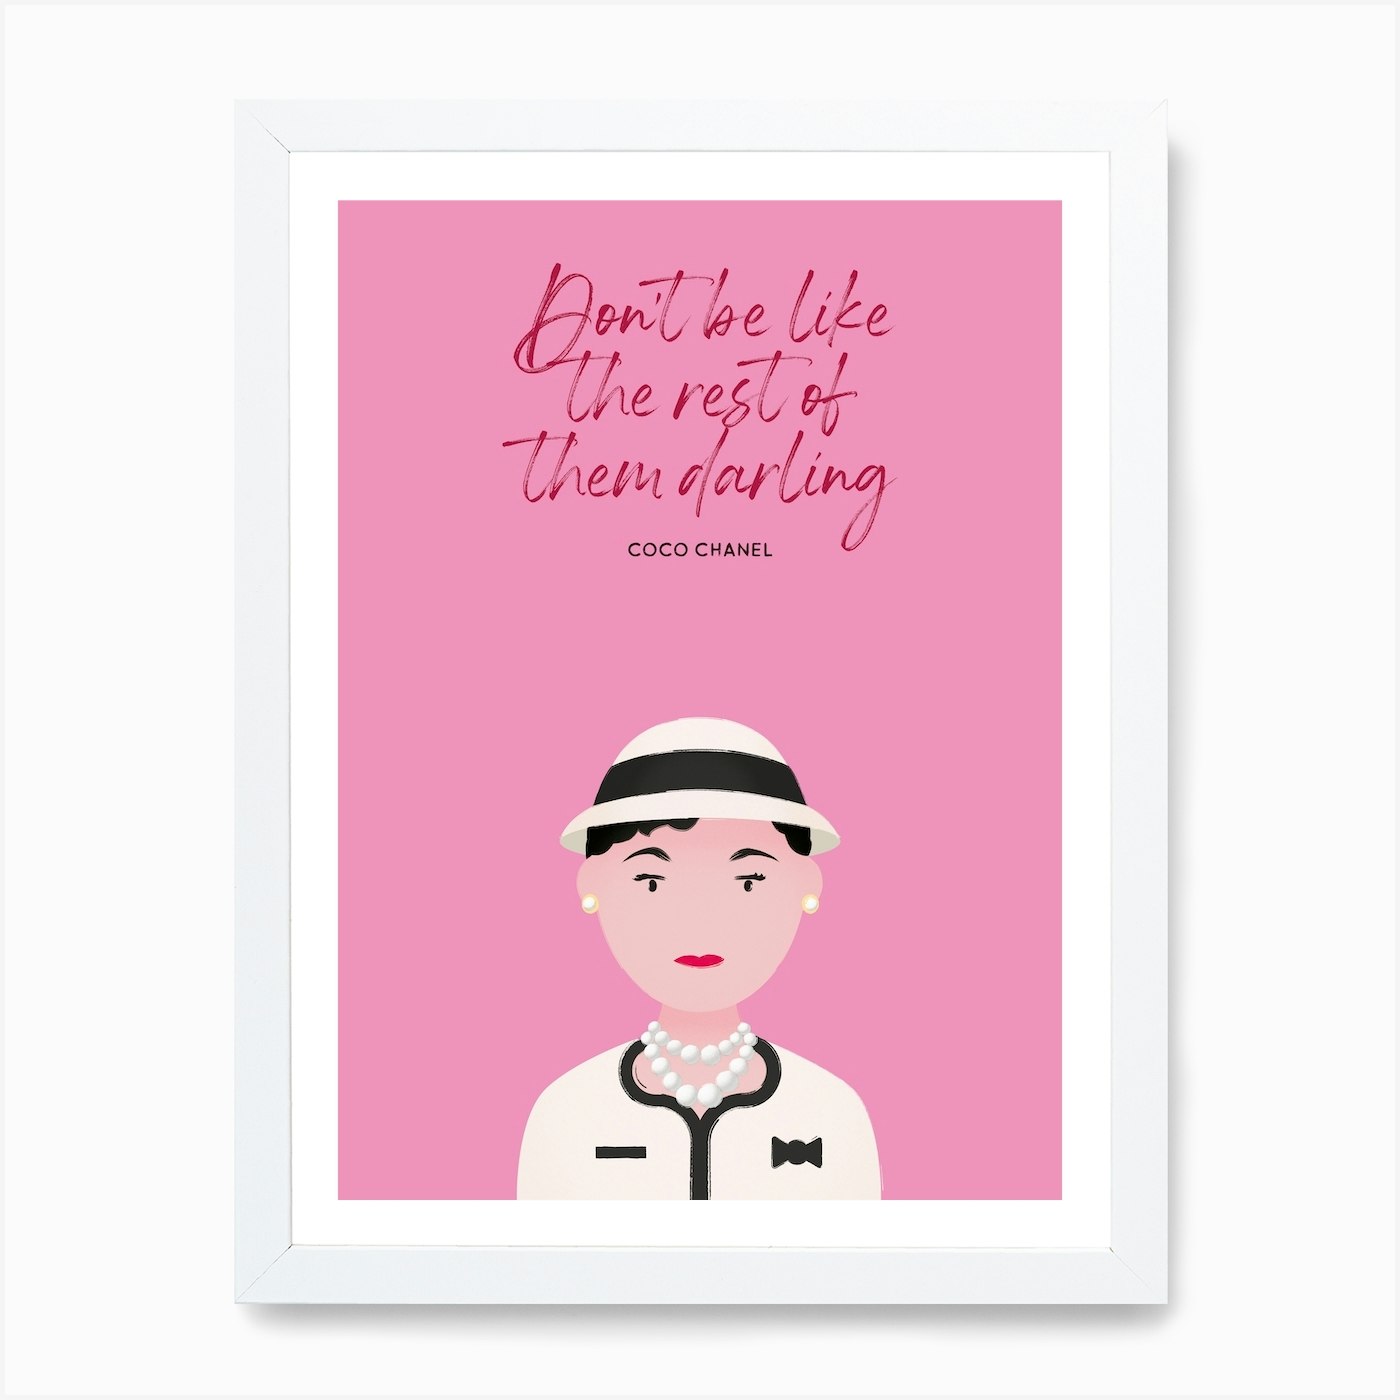 Inspirational people print – Coco Chanel Art Print by Mac&Pen - Fy